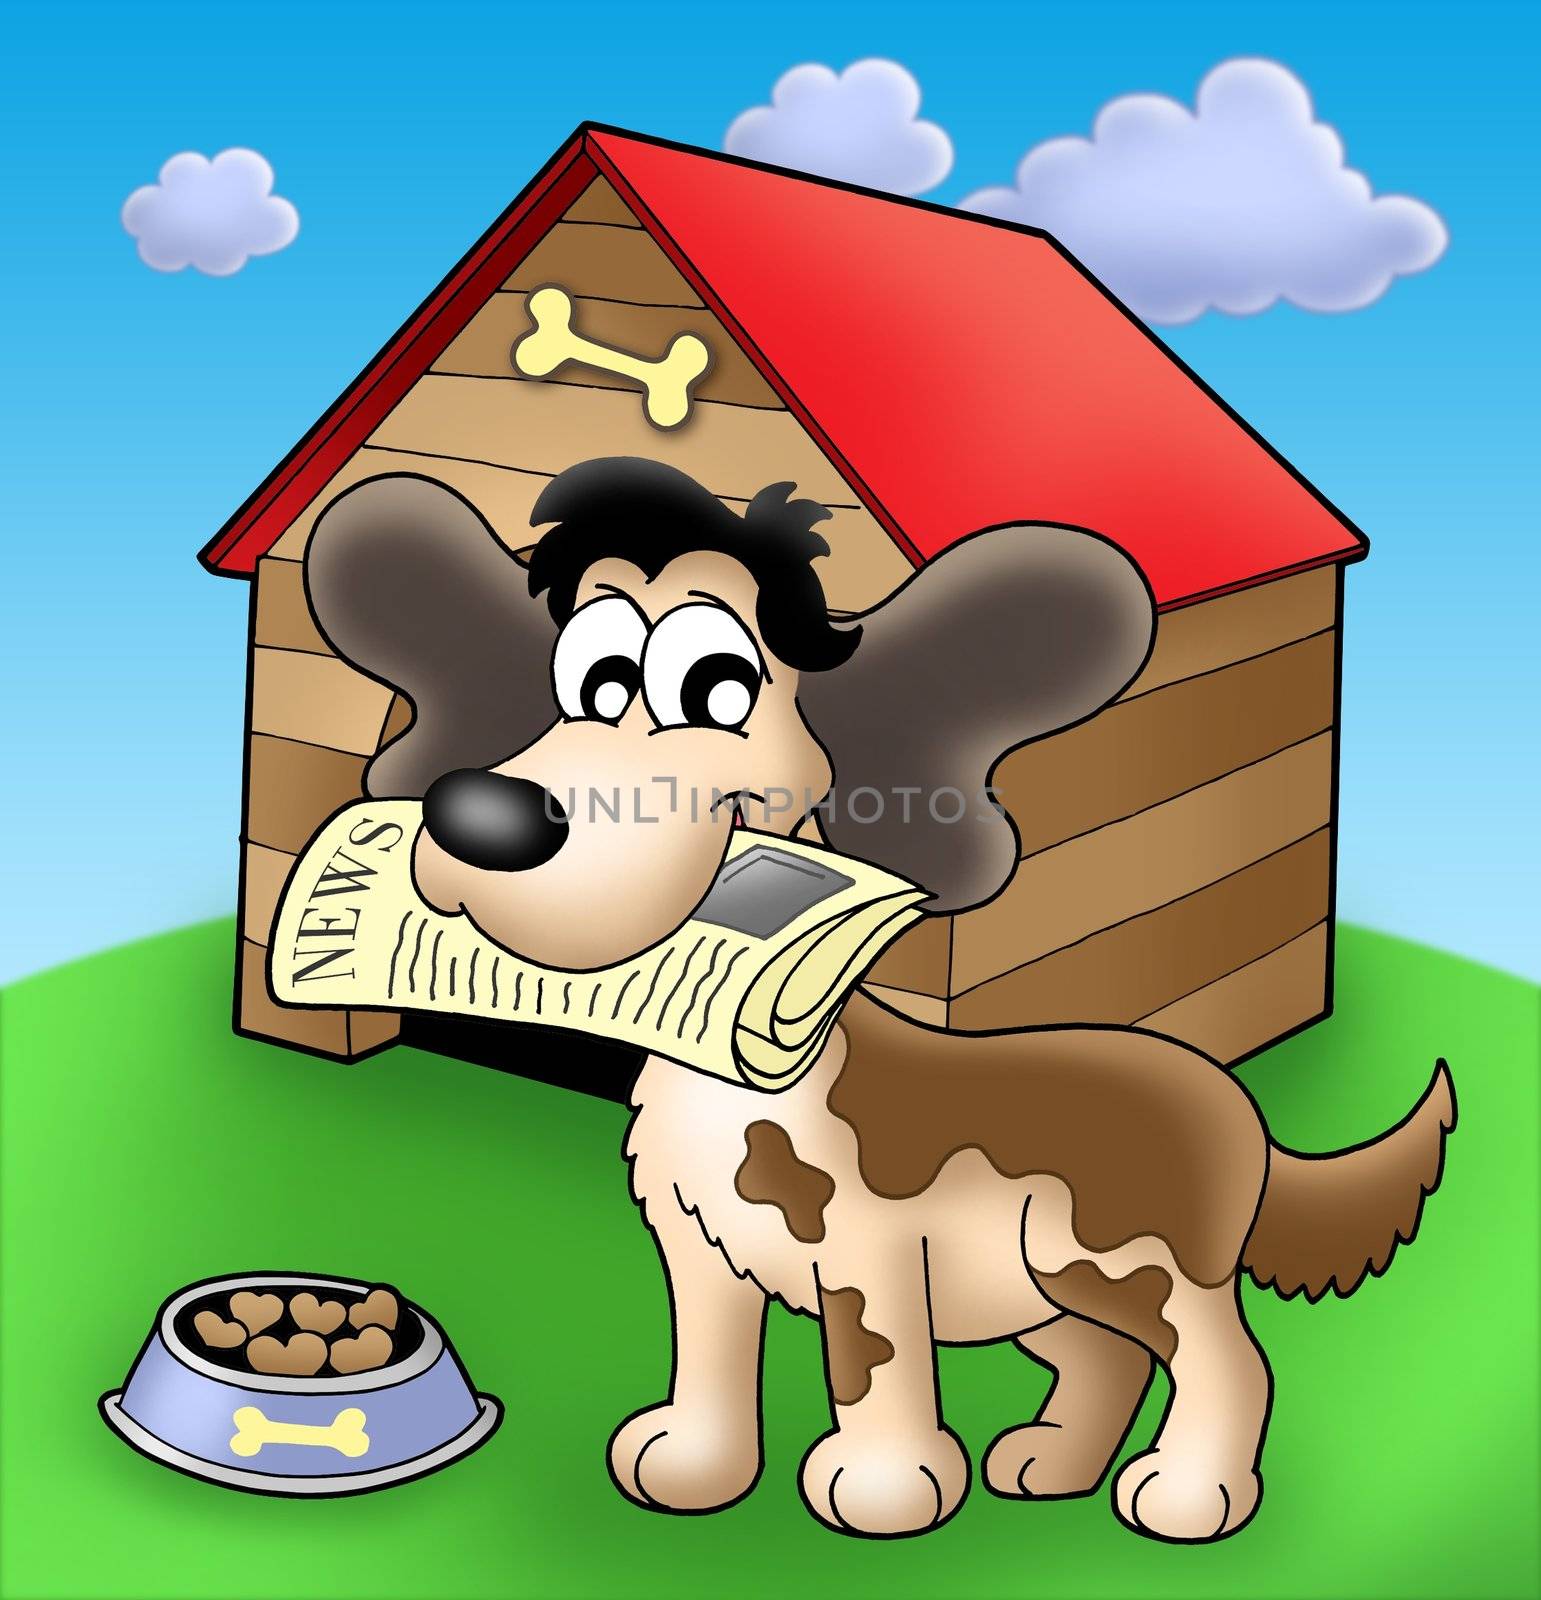 Dog with news in front of kennel - color illustration.